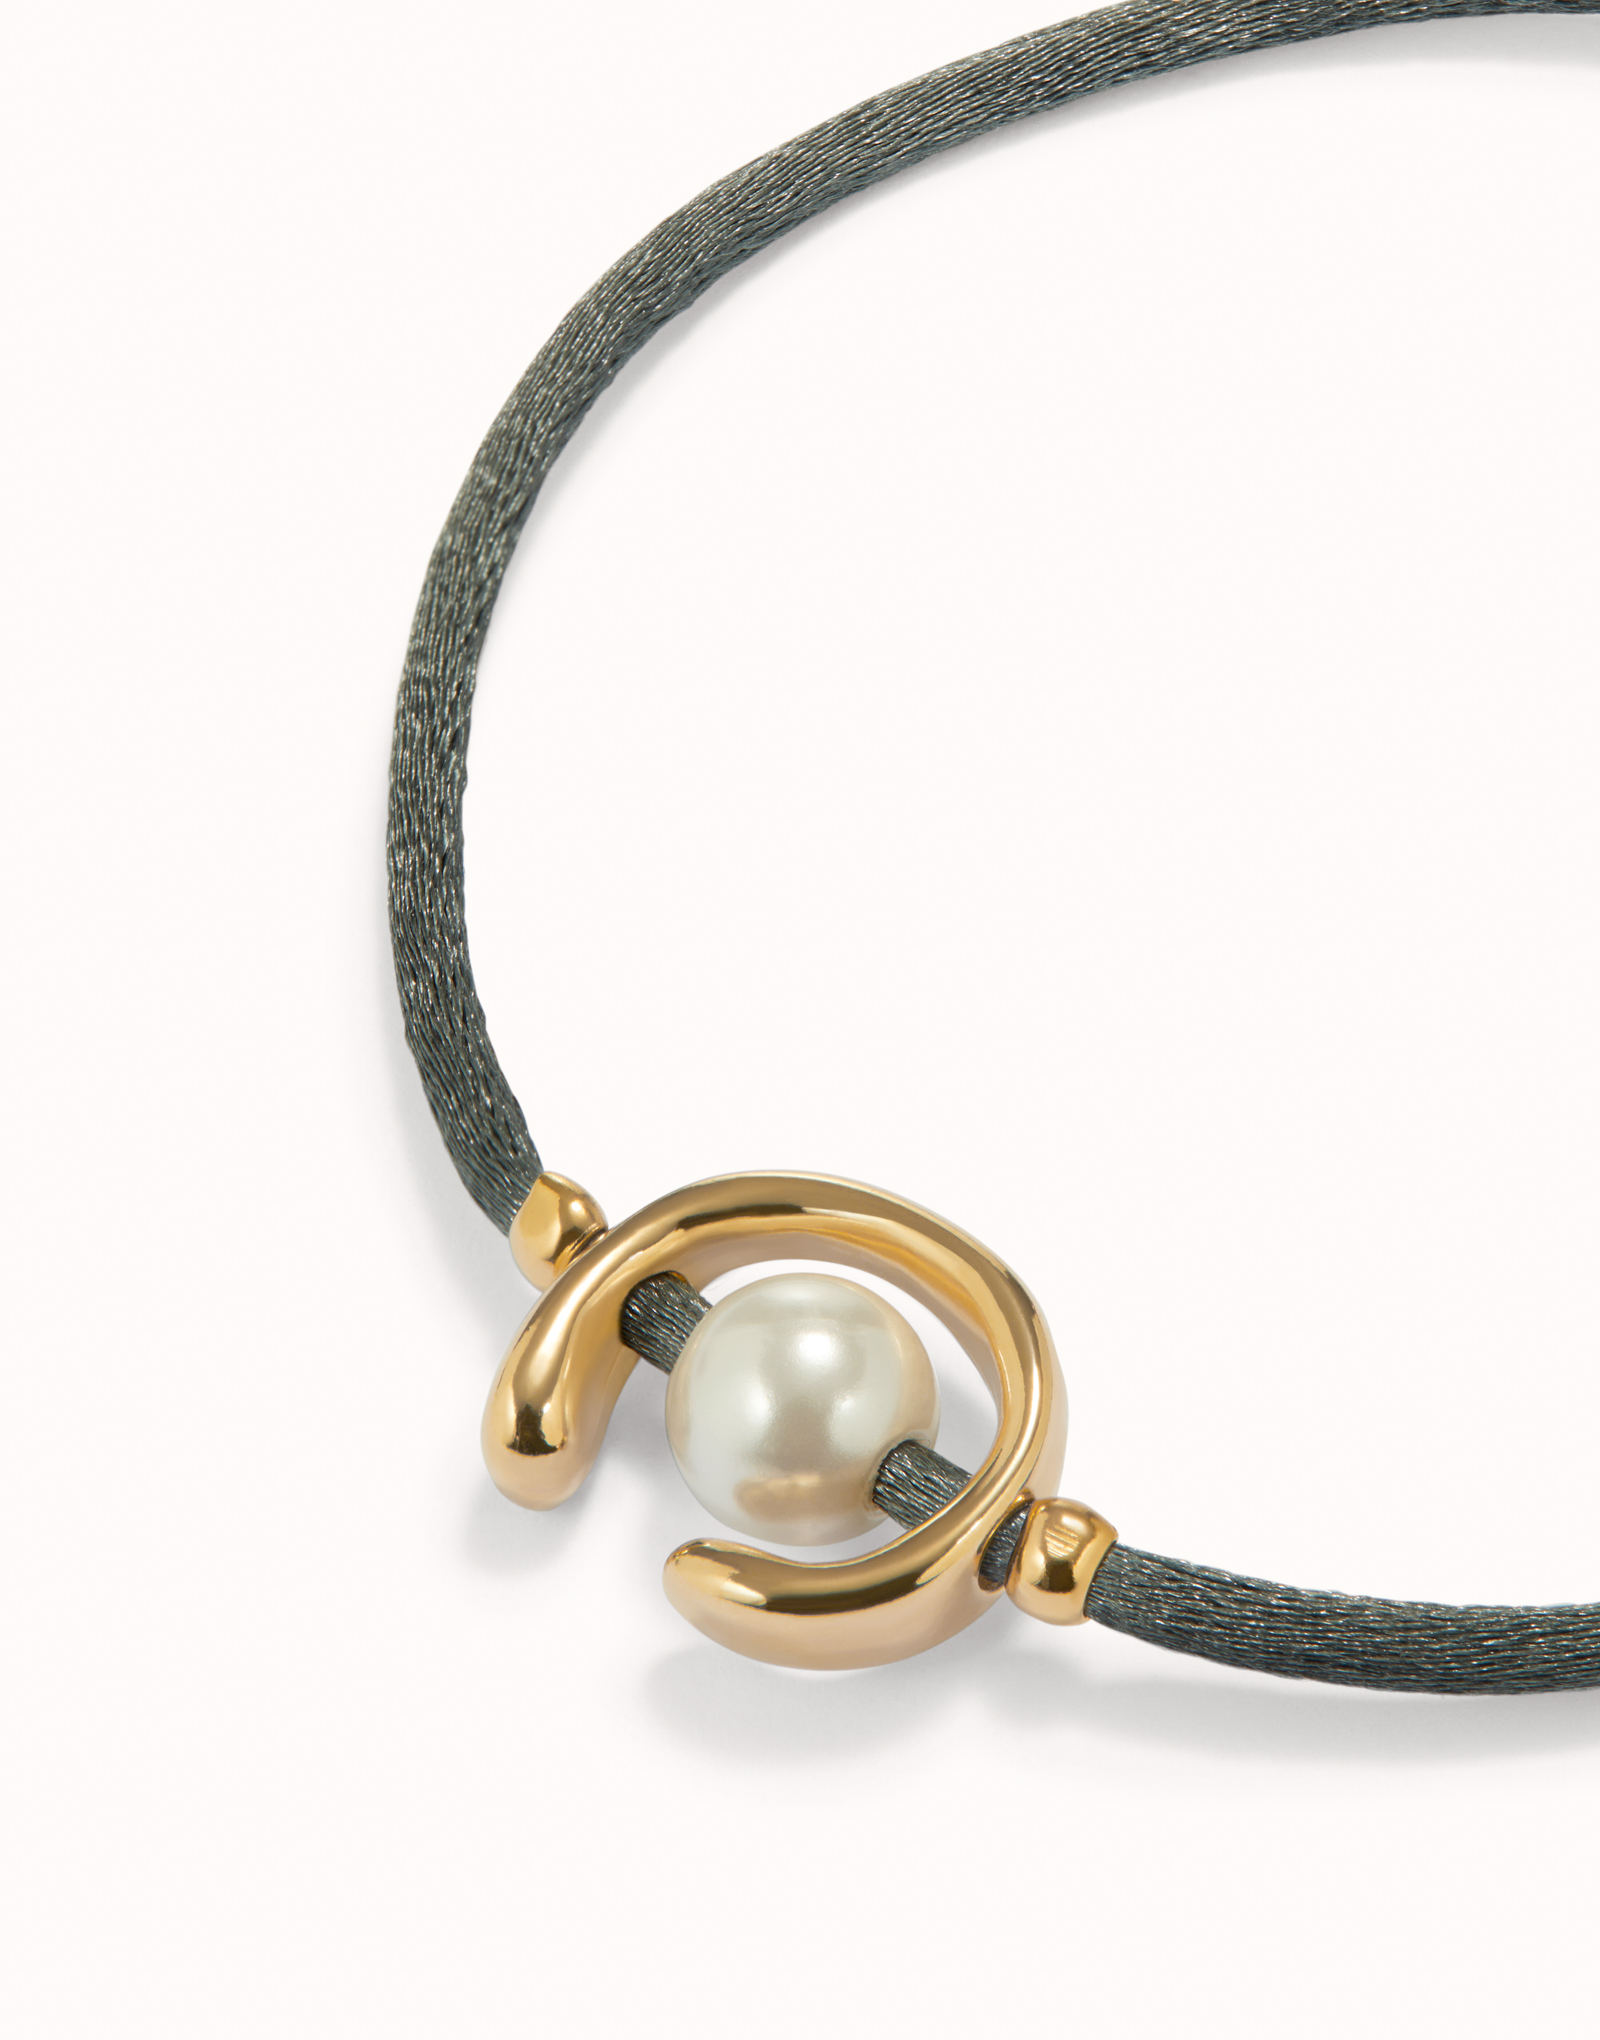 18K gold-plated blackish thread bracelet with shell pearl accessory., Golden, large image number null